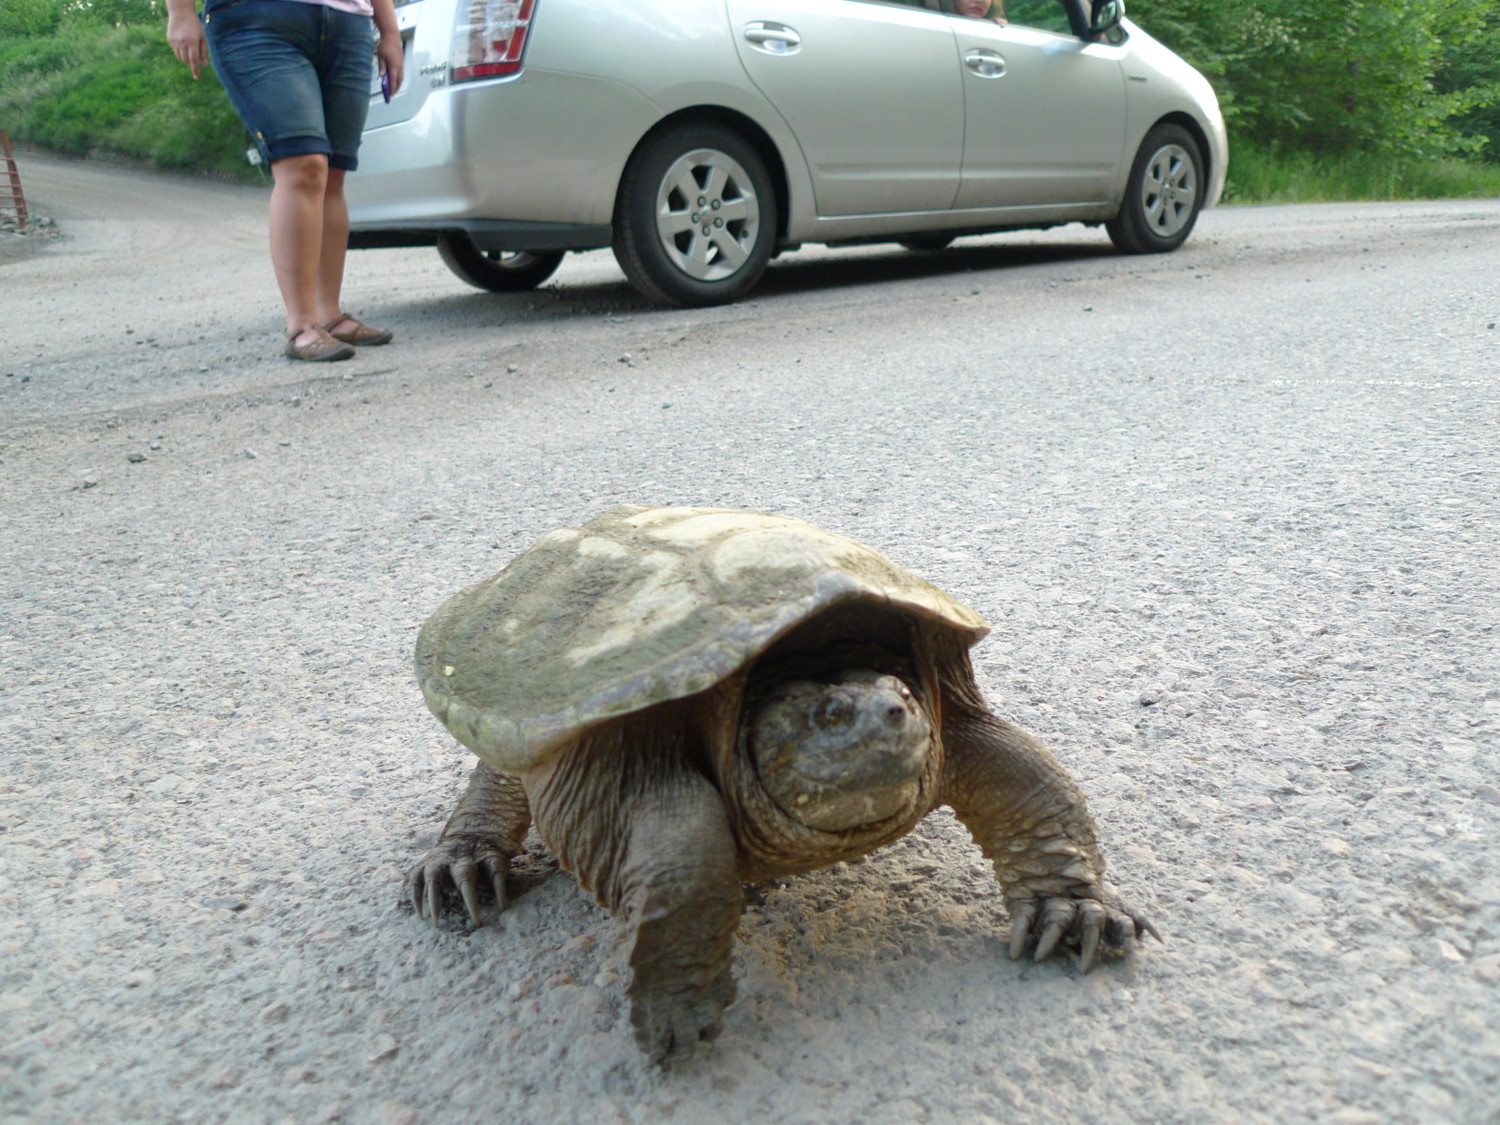 snapping turtle photo